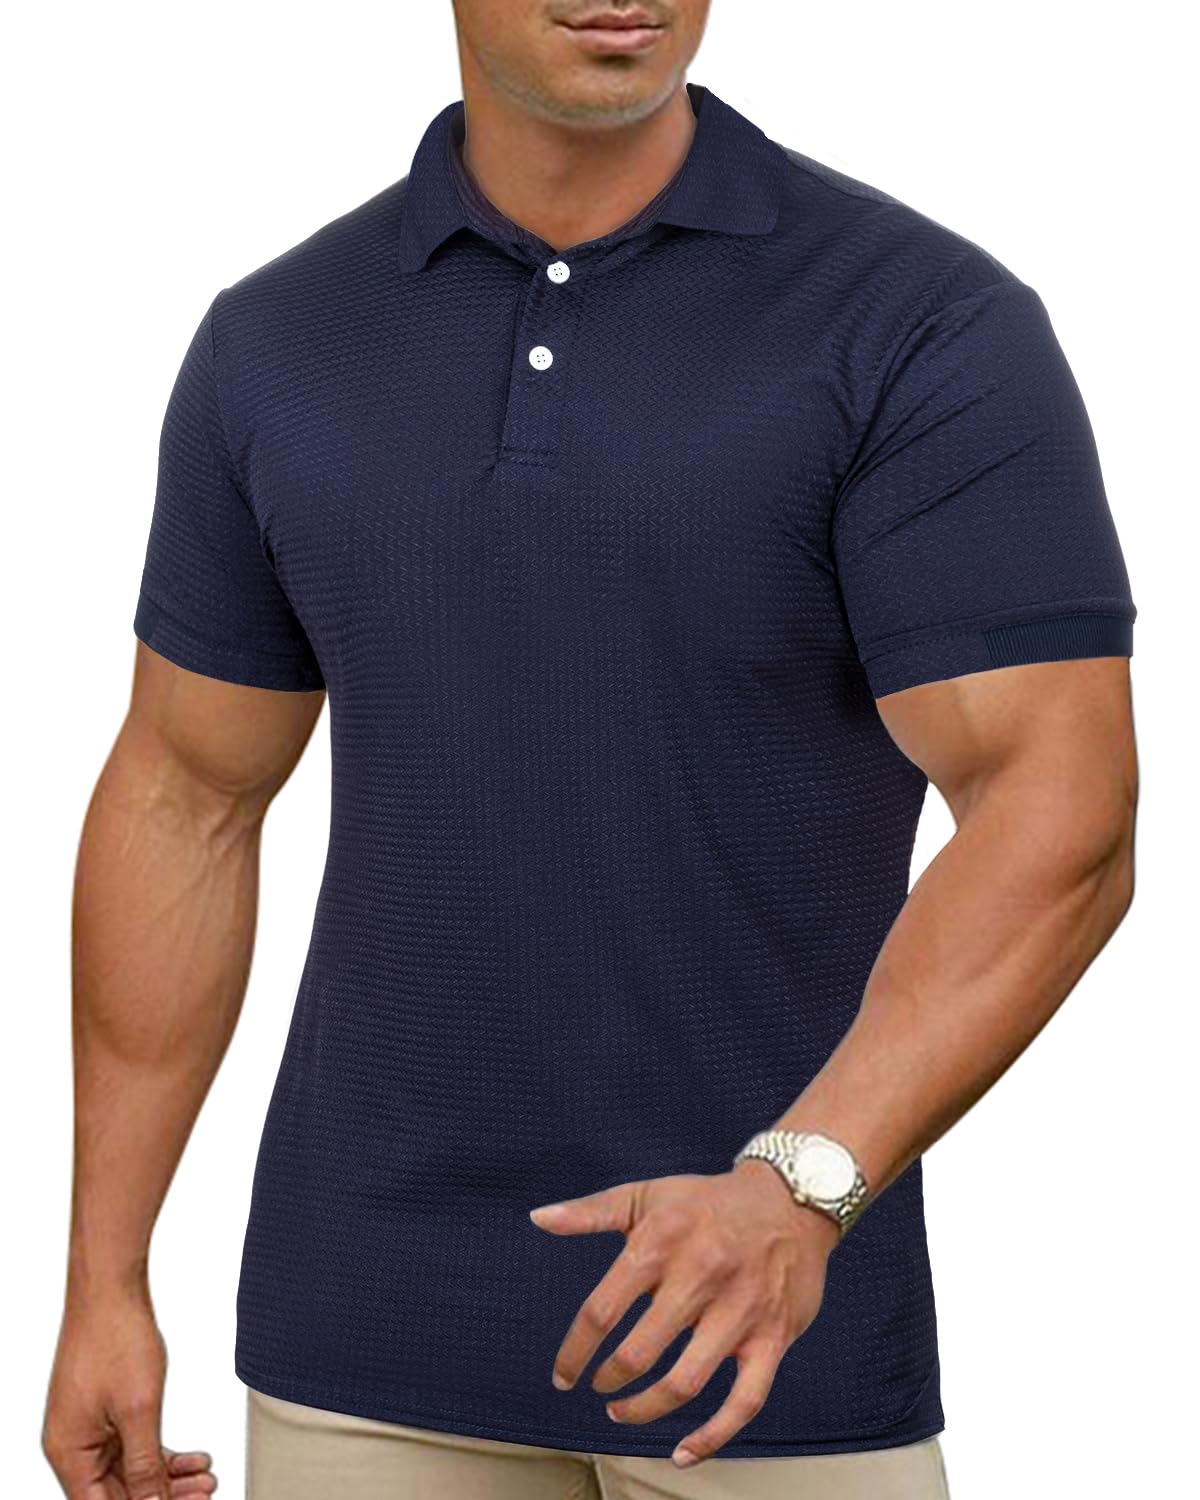 KAWATA Men's Muscle Polo Shirts Dry Fit Short Sleeve Stretch Slim Fit T Shirts Workout Golf Shirt